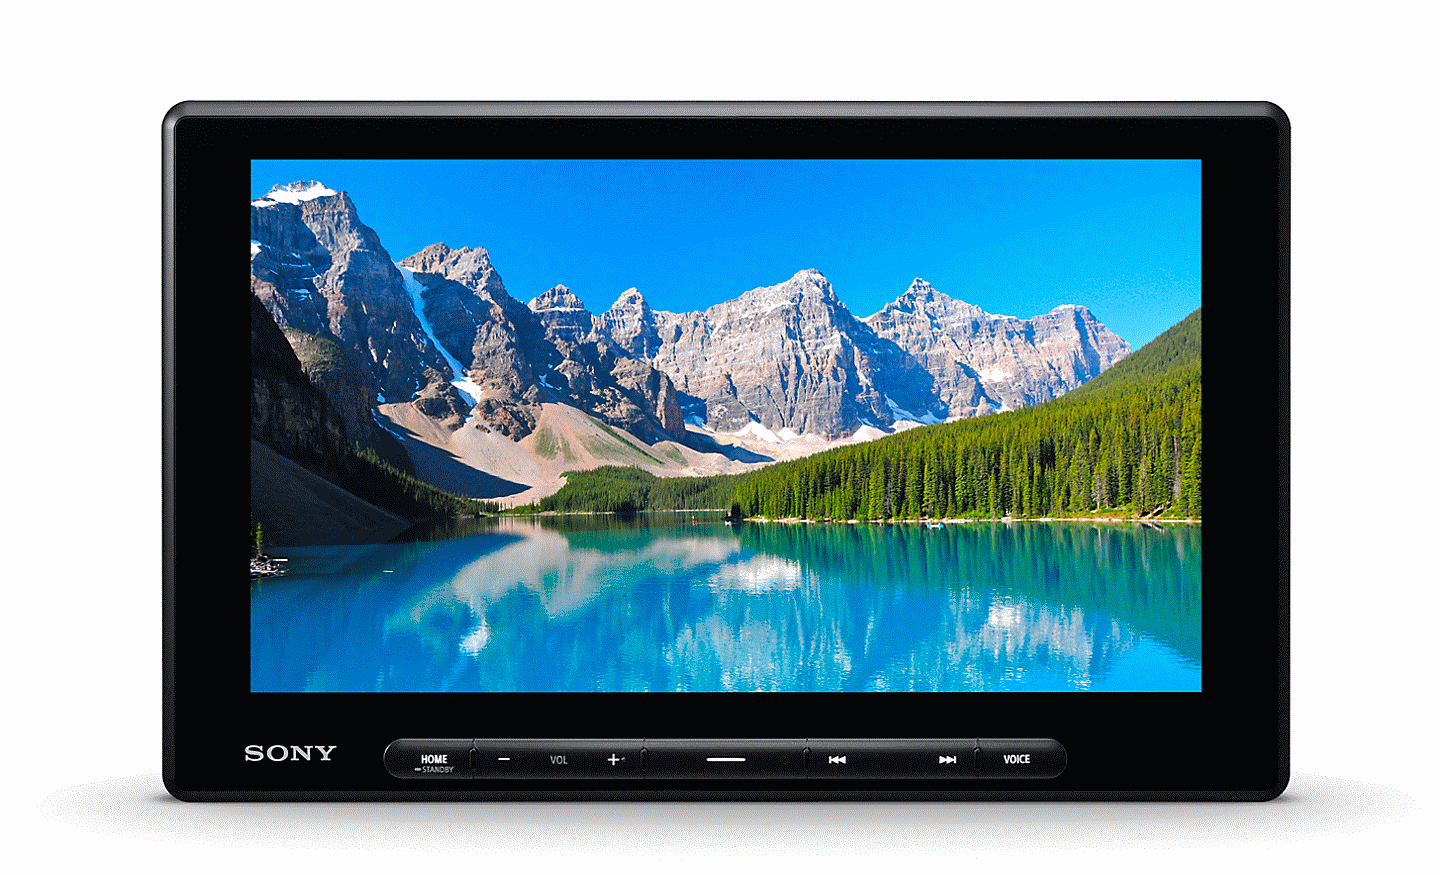 Front view of the XAV-AX8500 displaying an image of mountains and a lake on-screen